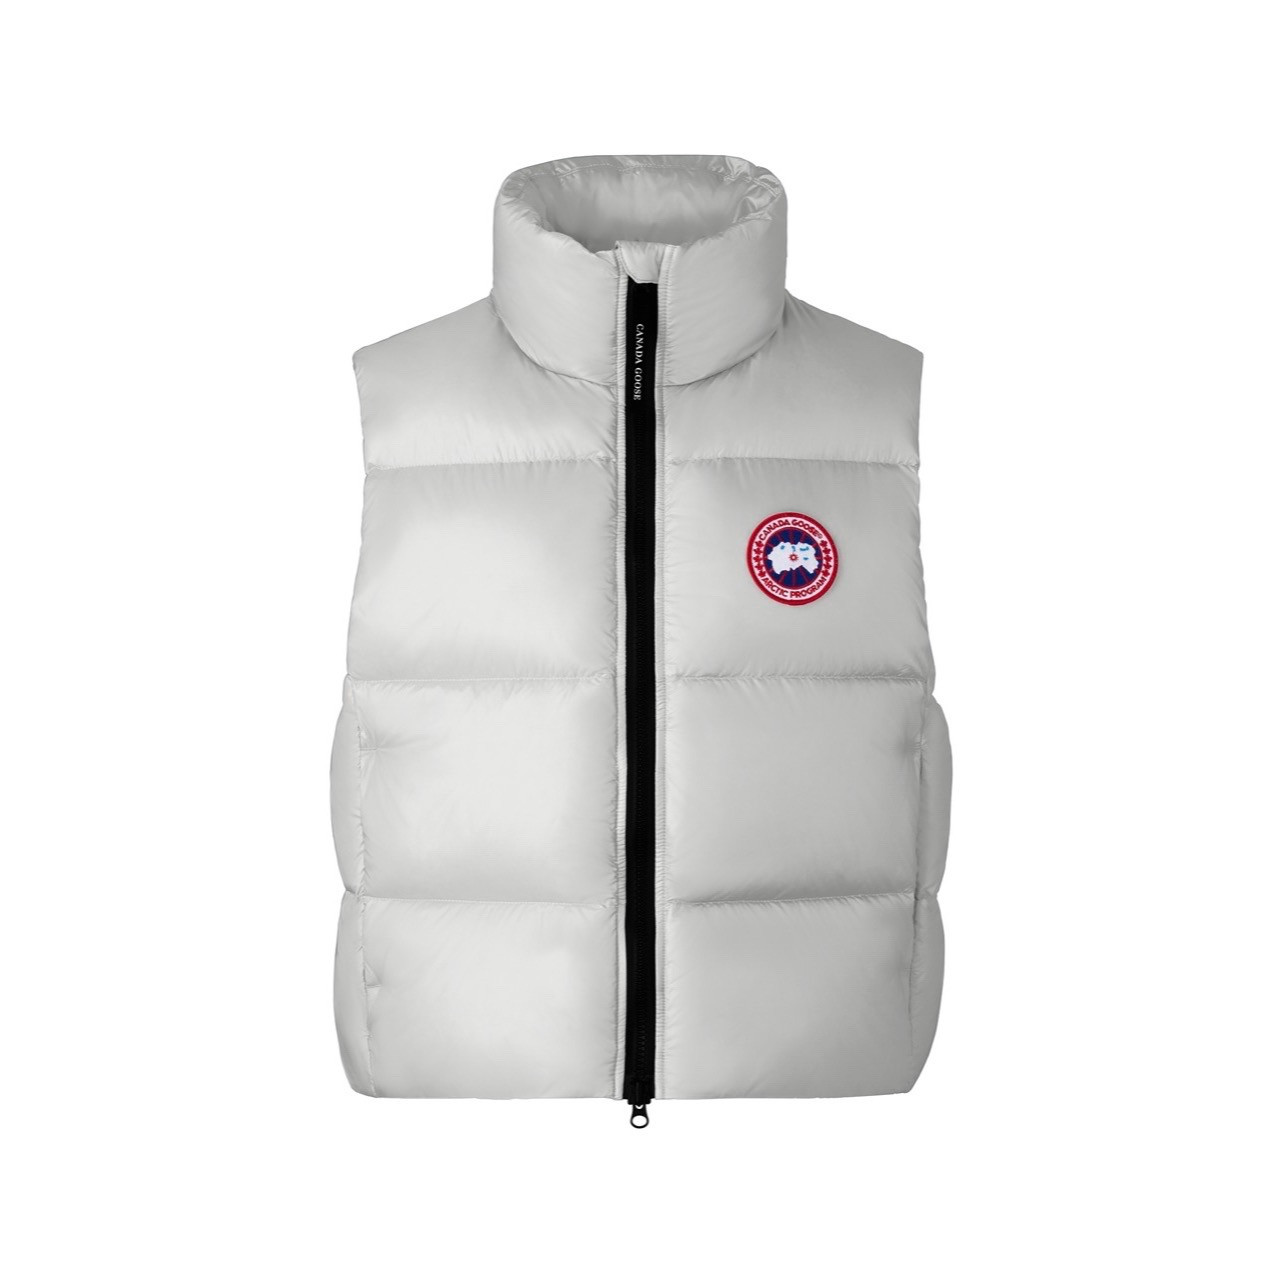 Cypress Down Jacket in Silver - Canada Goose Kids